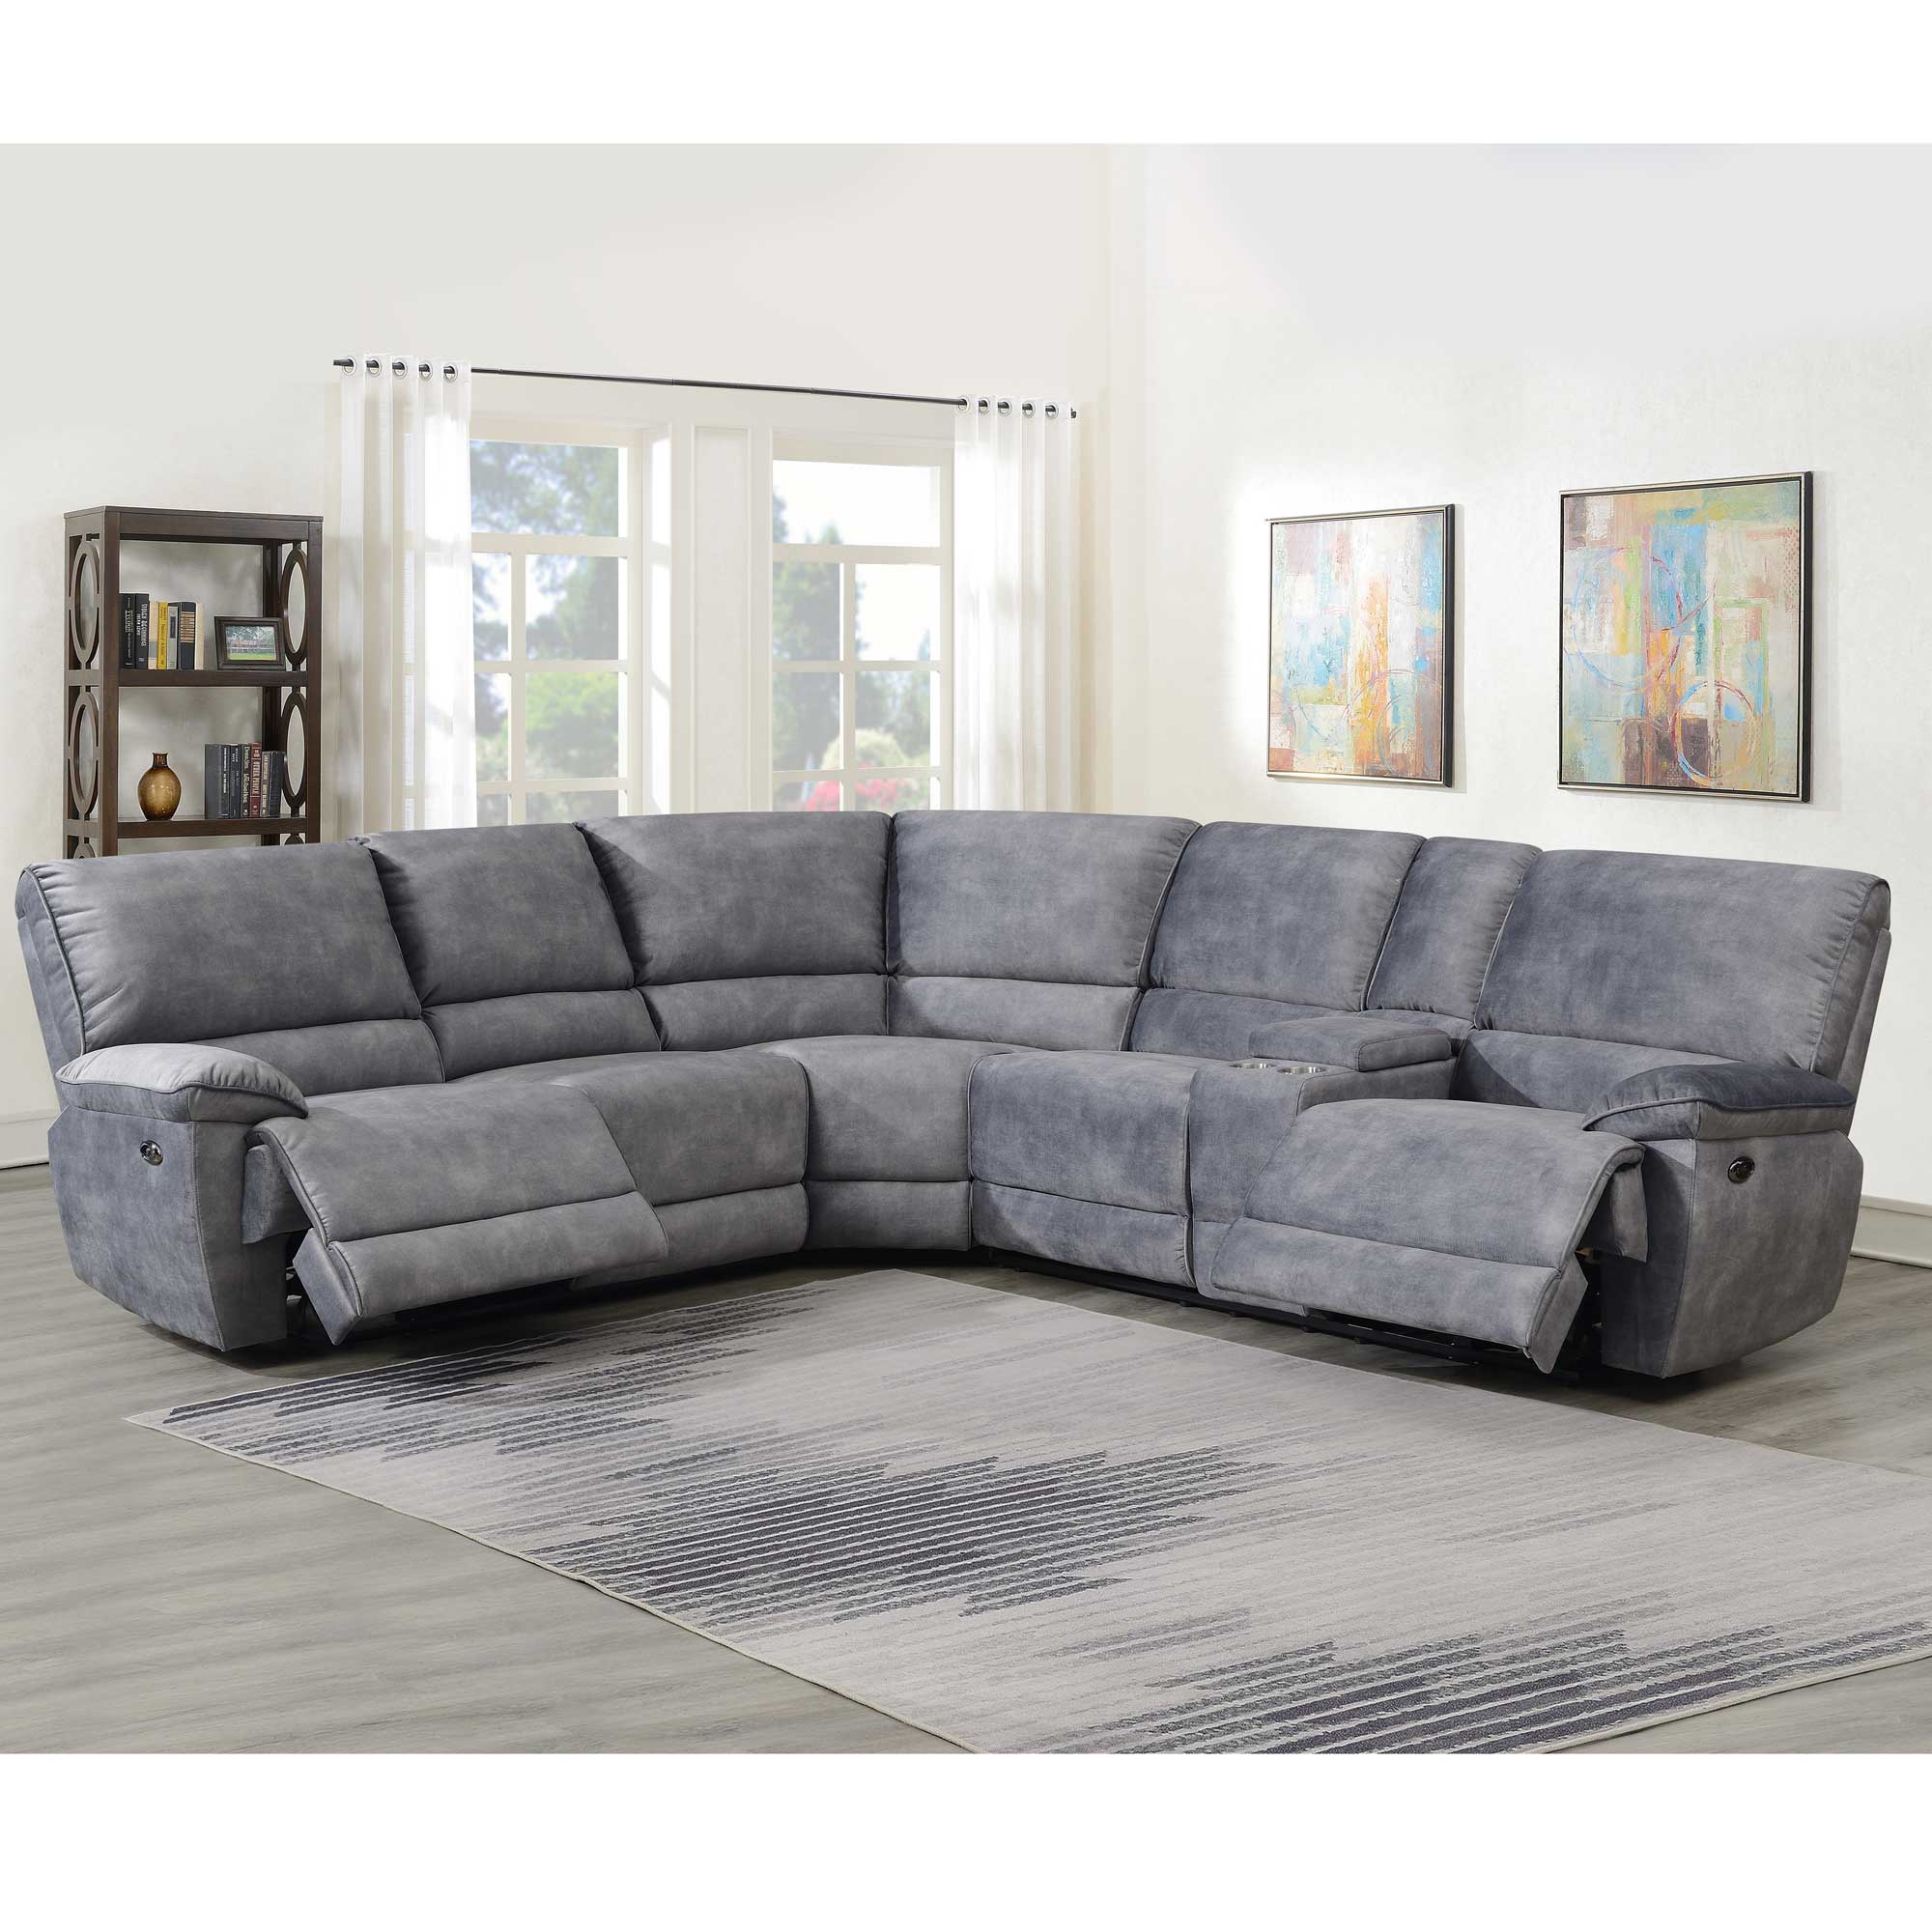 SIMONE 3-PIECE POWER RECLINING SECTIONAL by Steve Silver